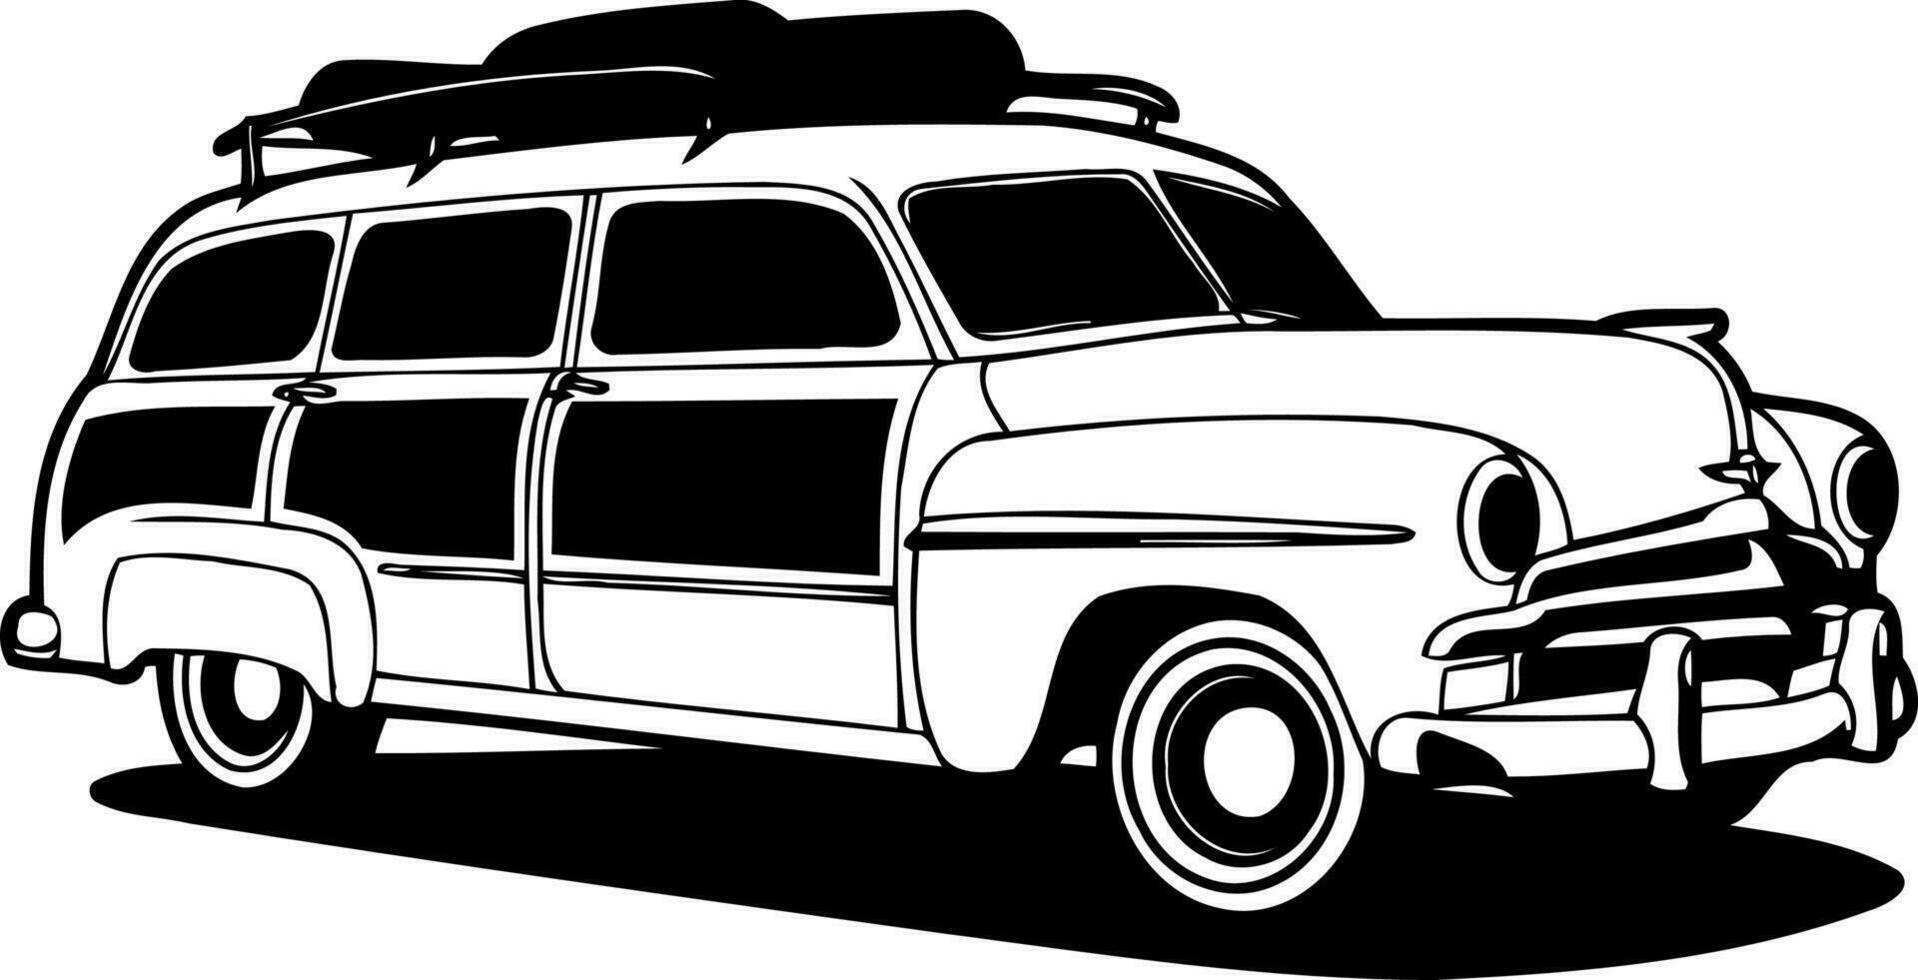 classic woodie car in black and white vector